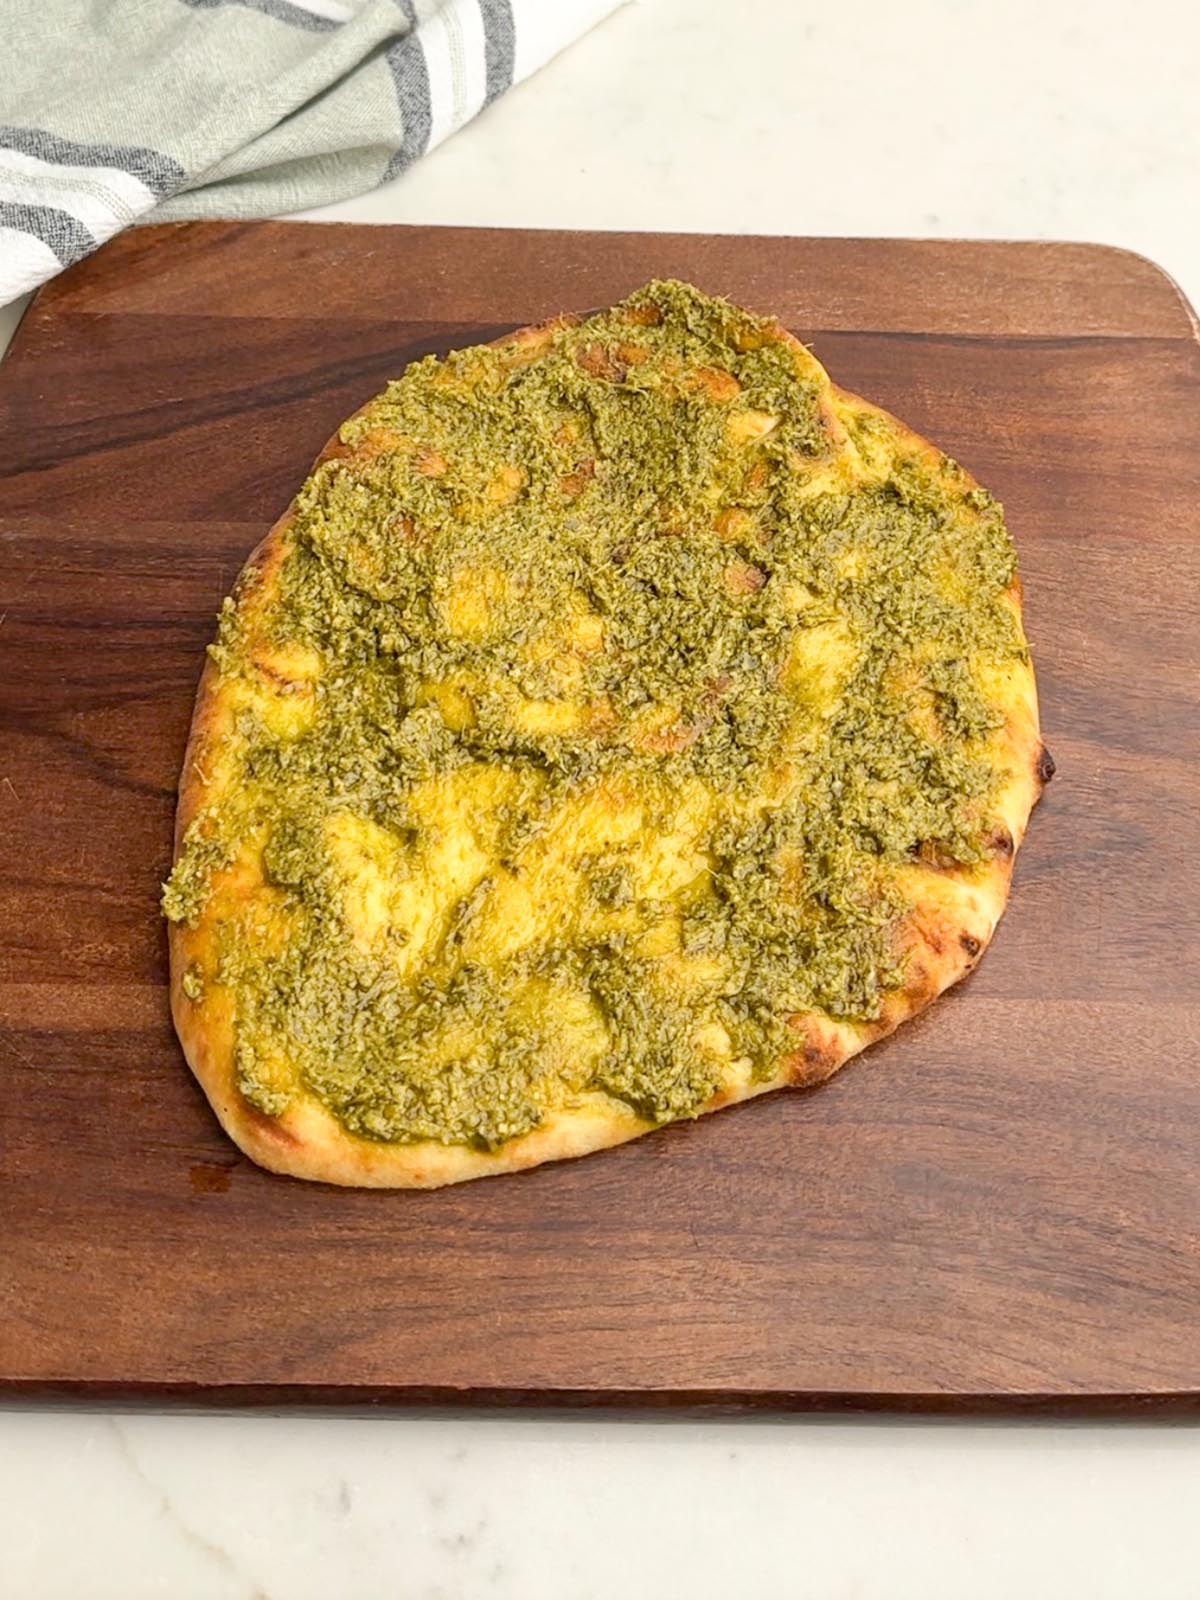 naan flatbread topped with pesto on a wooden cutting board